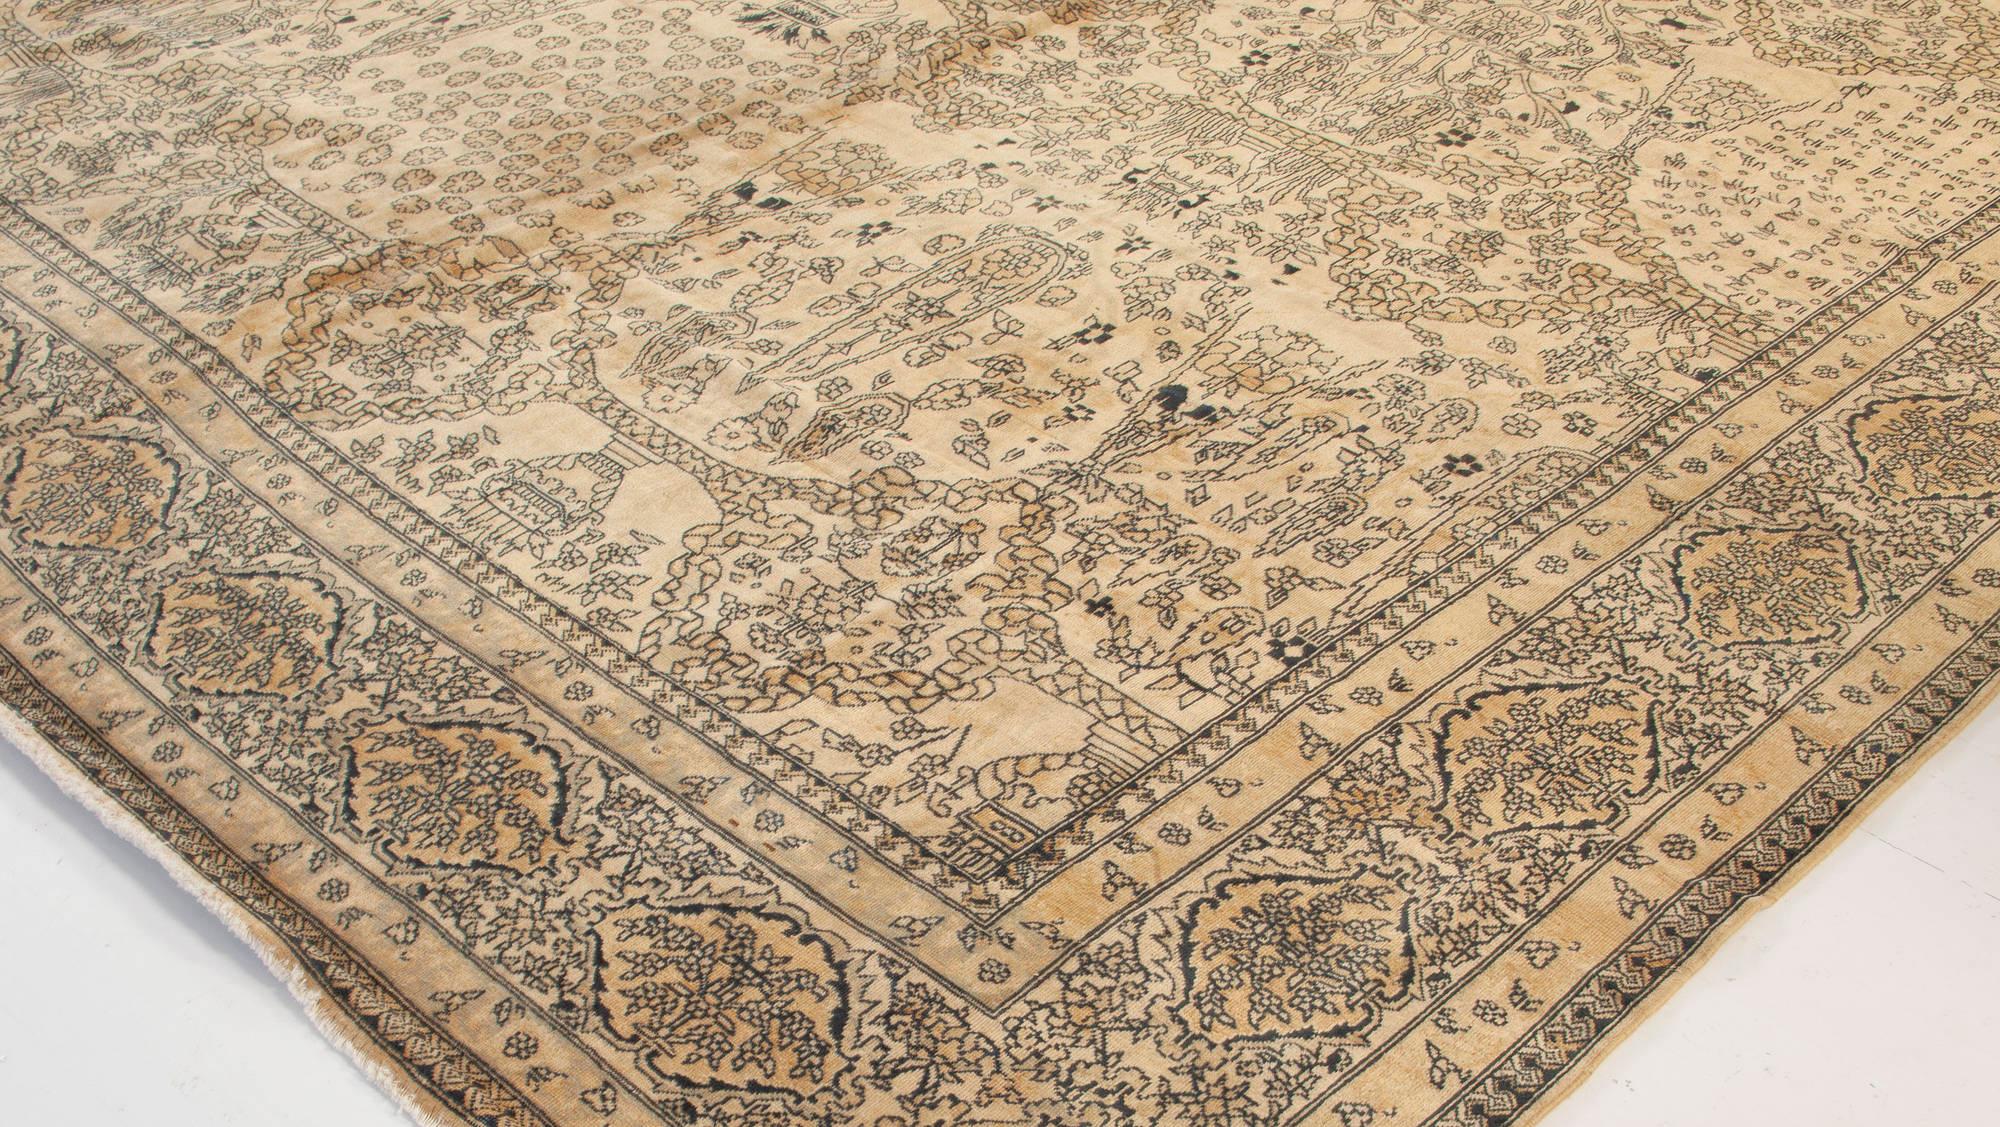 Oversized Vintage Indian Carpet (size adjusted) In Good Condition For Sale In New York, NY